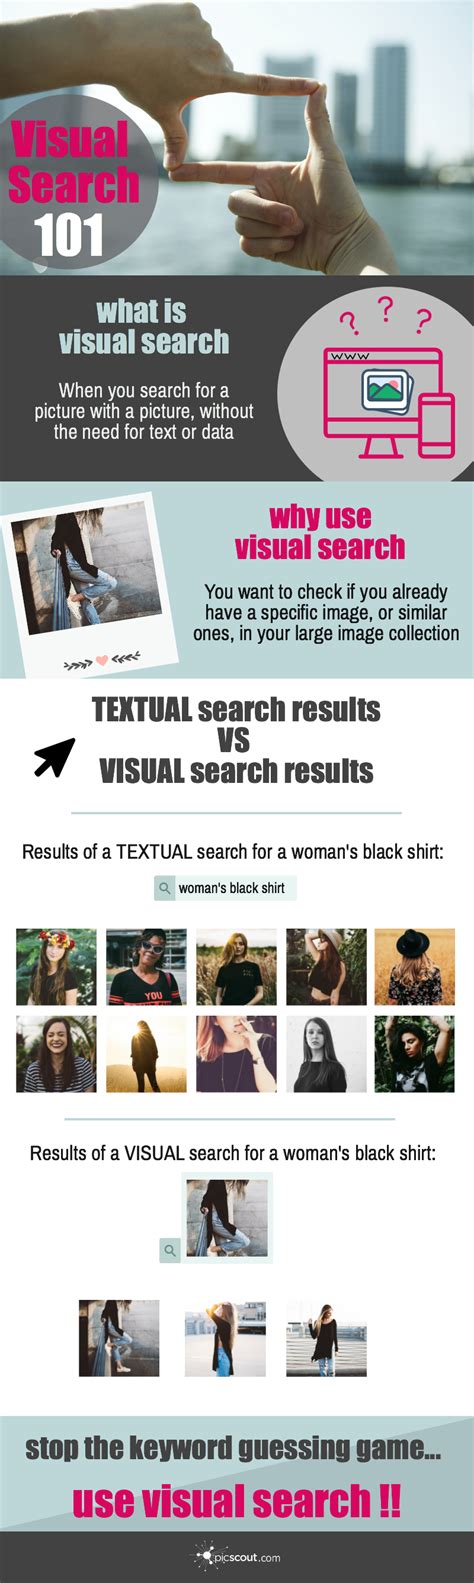 visual search learn image recognition basics  picscout